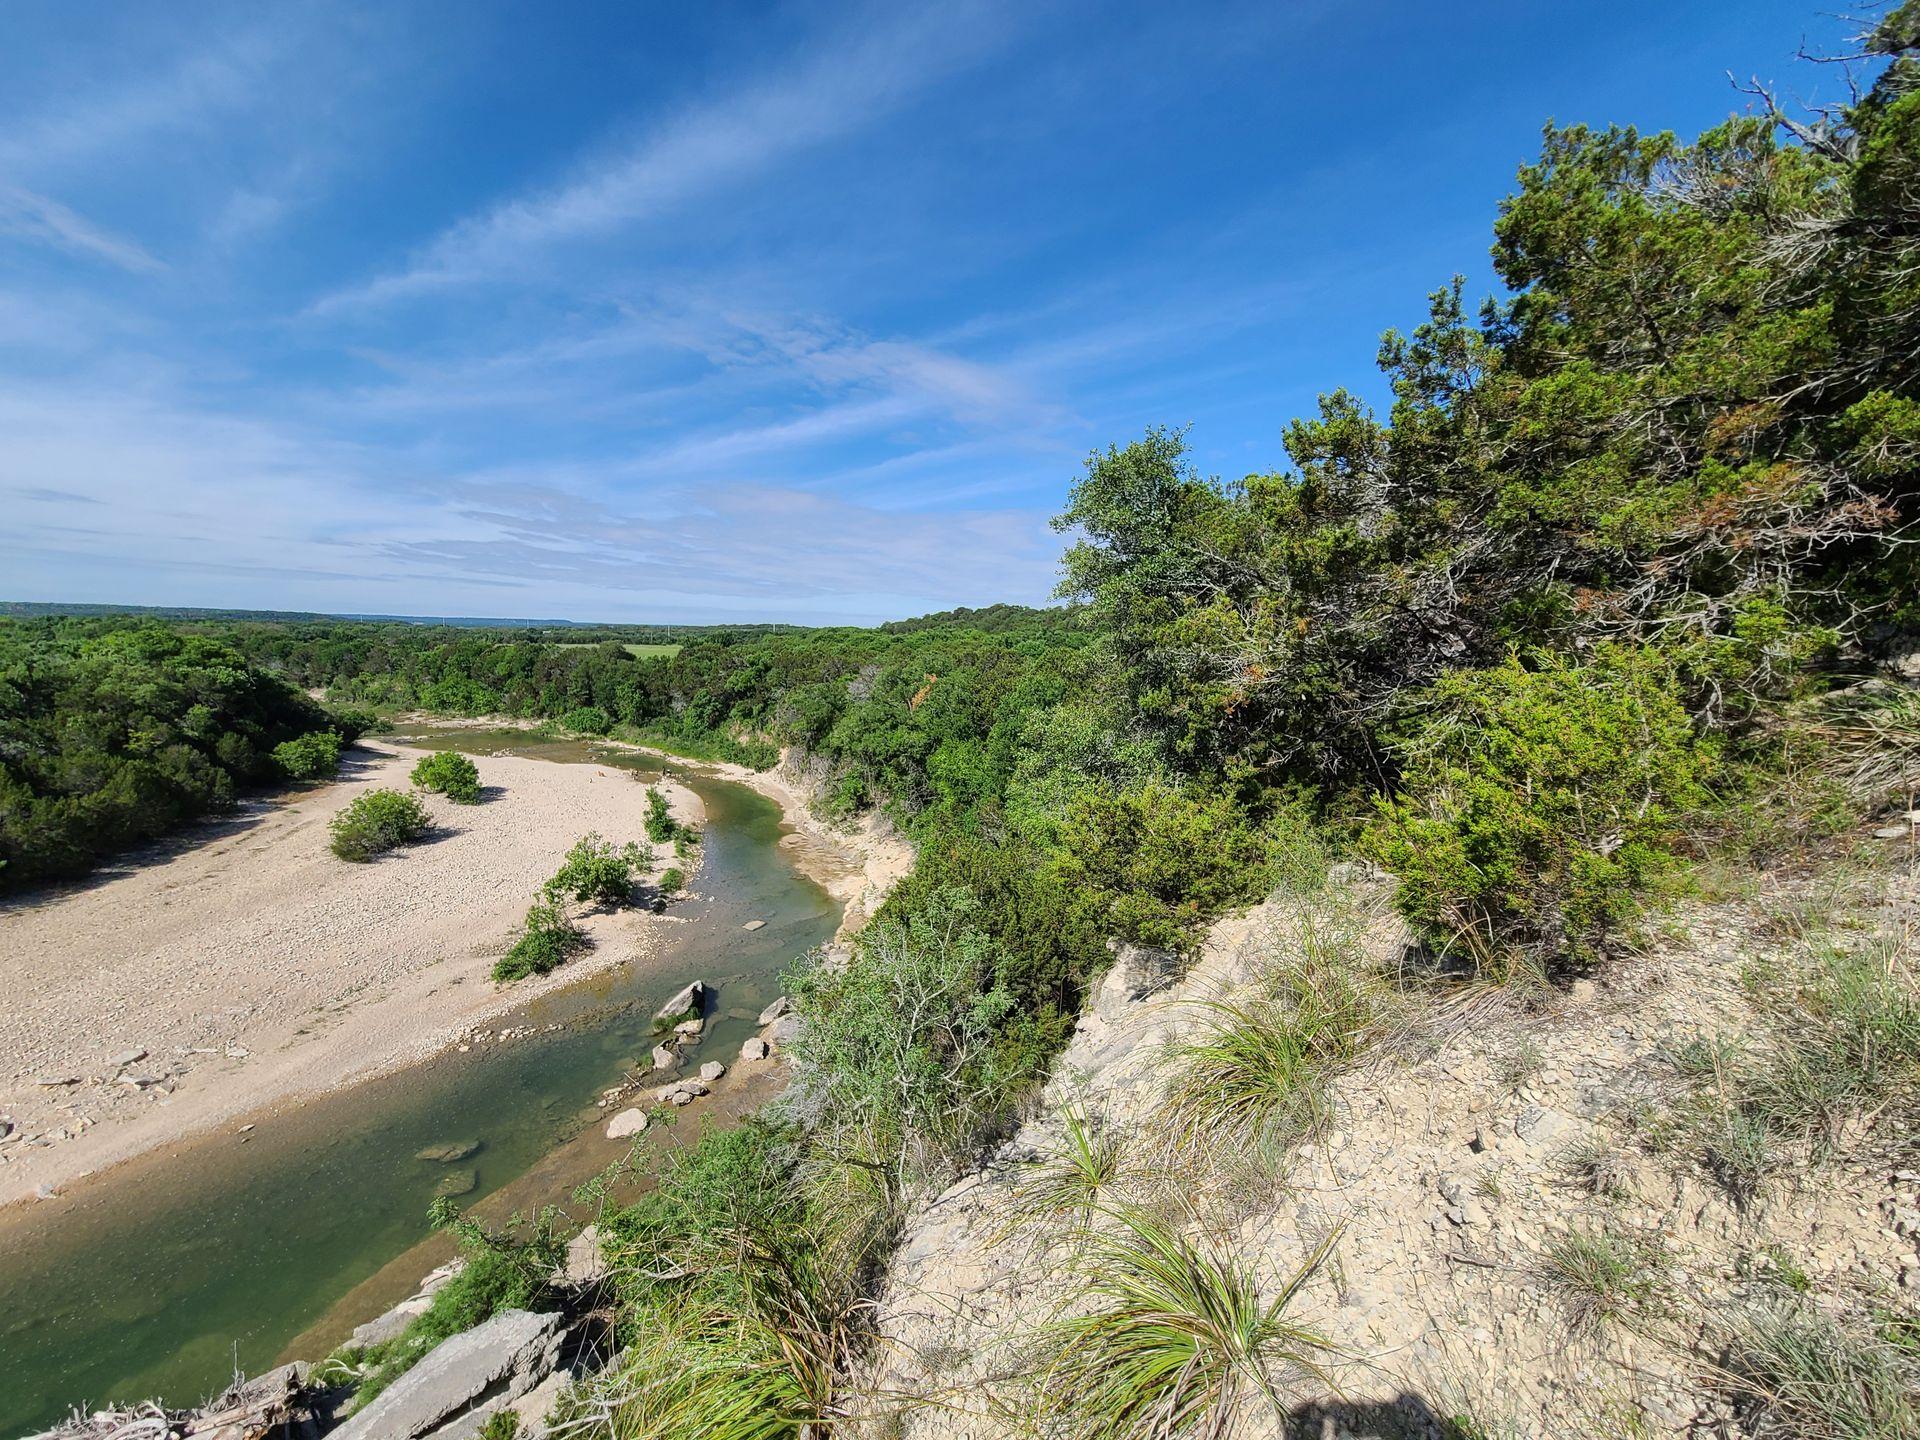 A view of the Paluxy River from an overlook in Dinosaur Valley State Park.